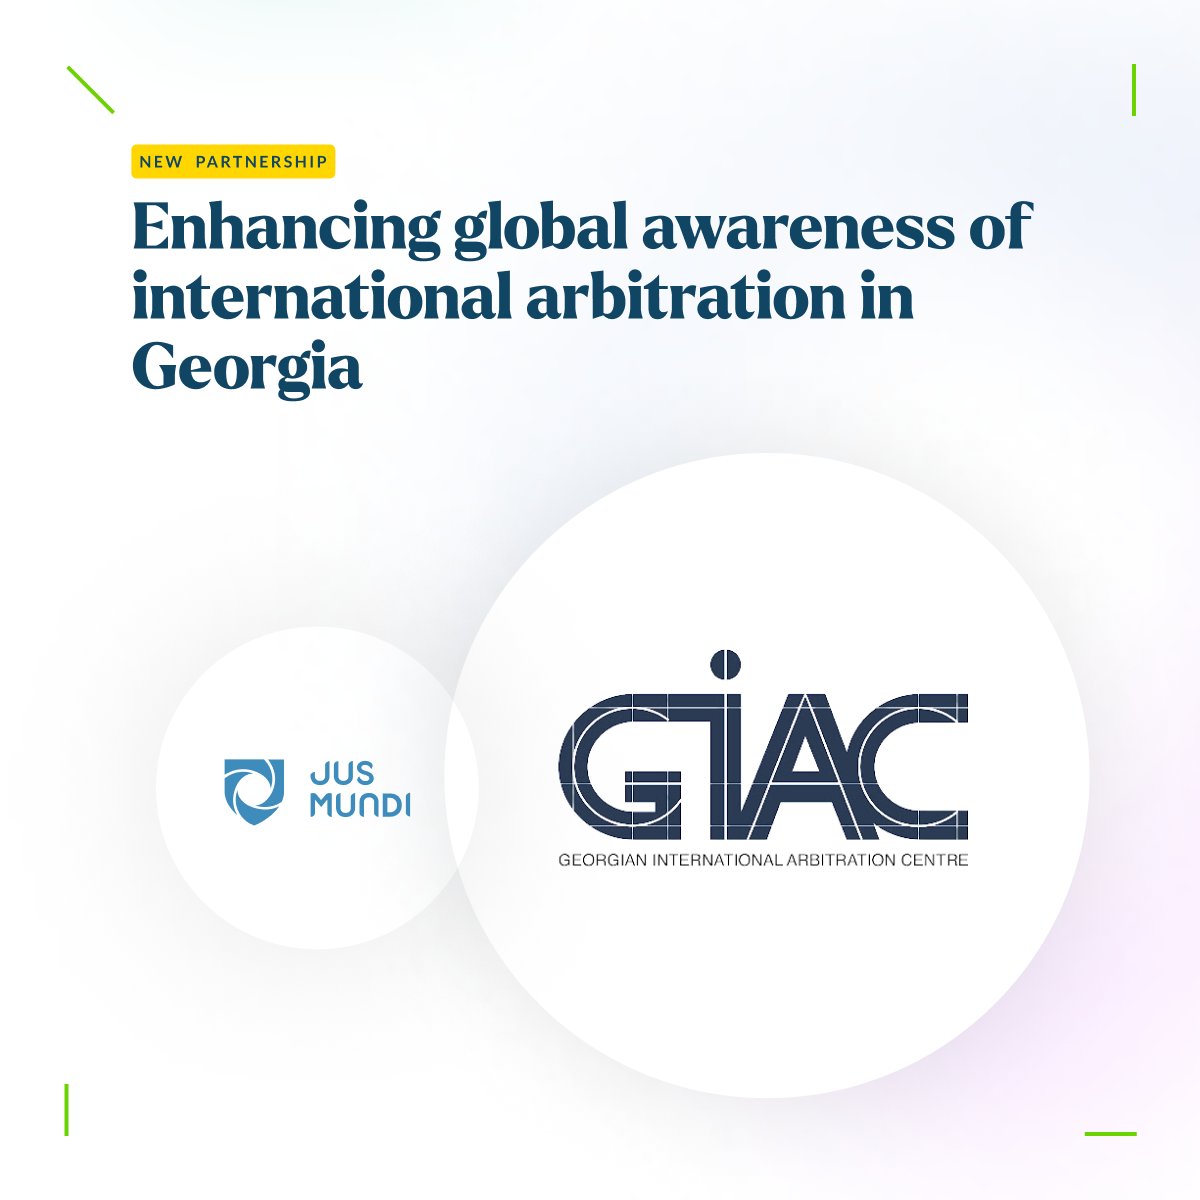 GIAC IS STARTING A SIGNIFICANT PARTNERSHIP WITH JUS MUNDI